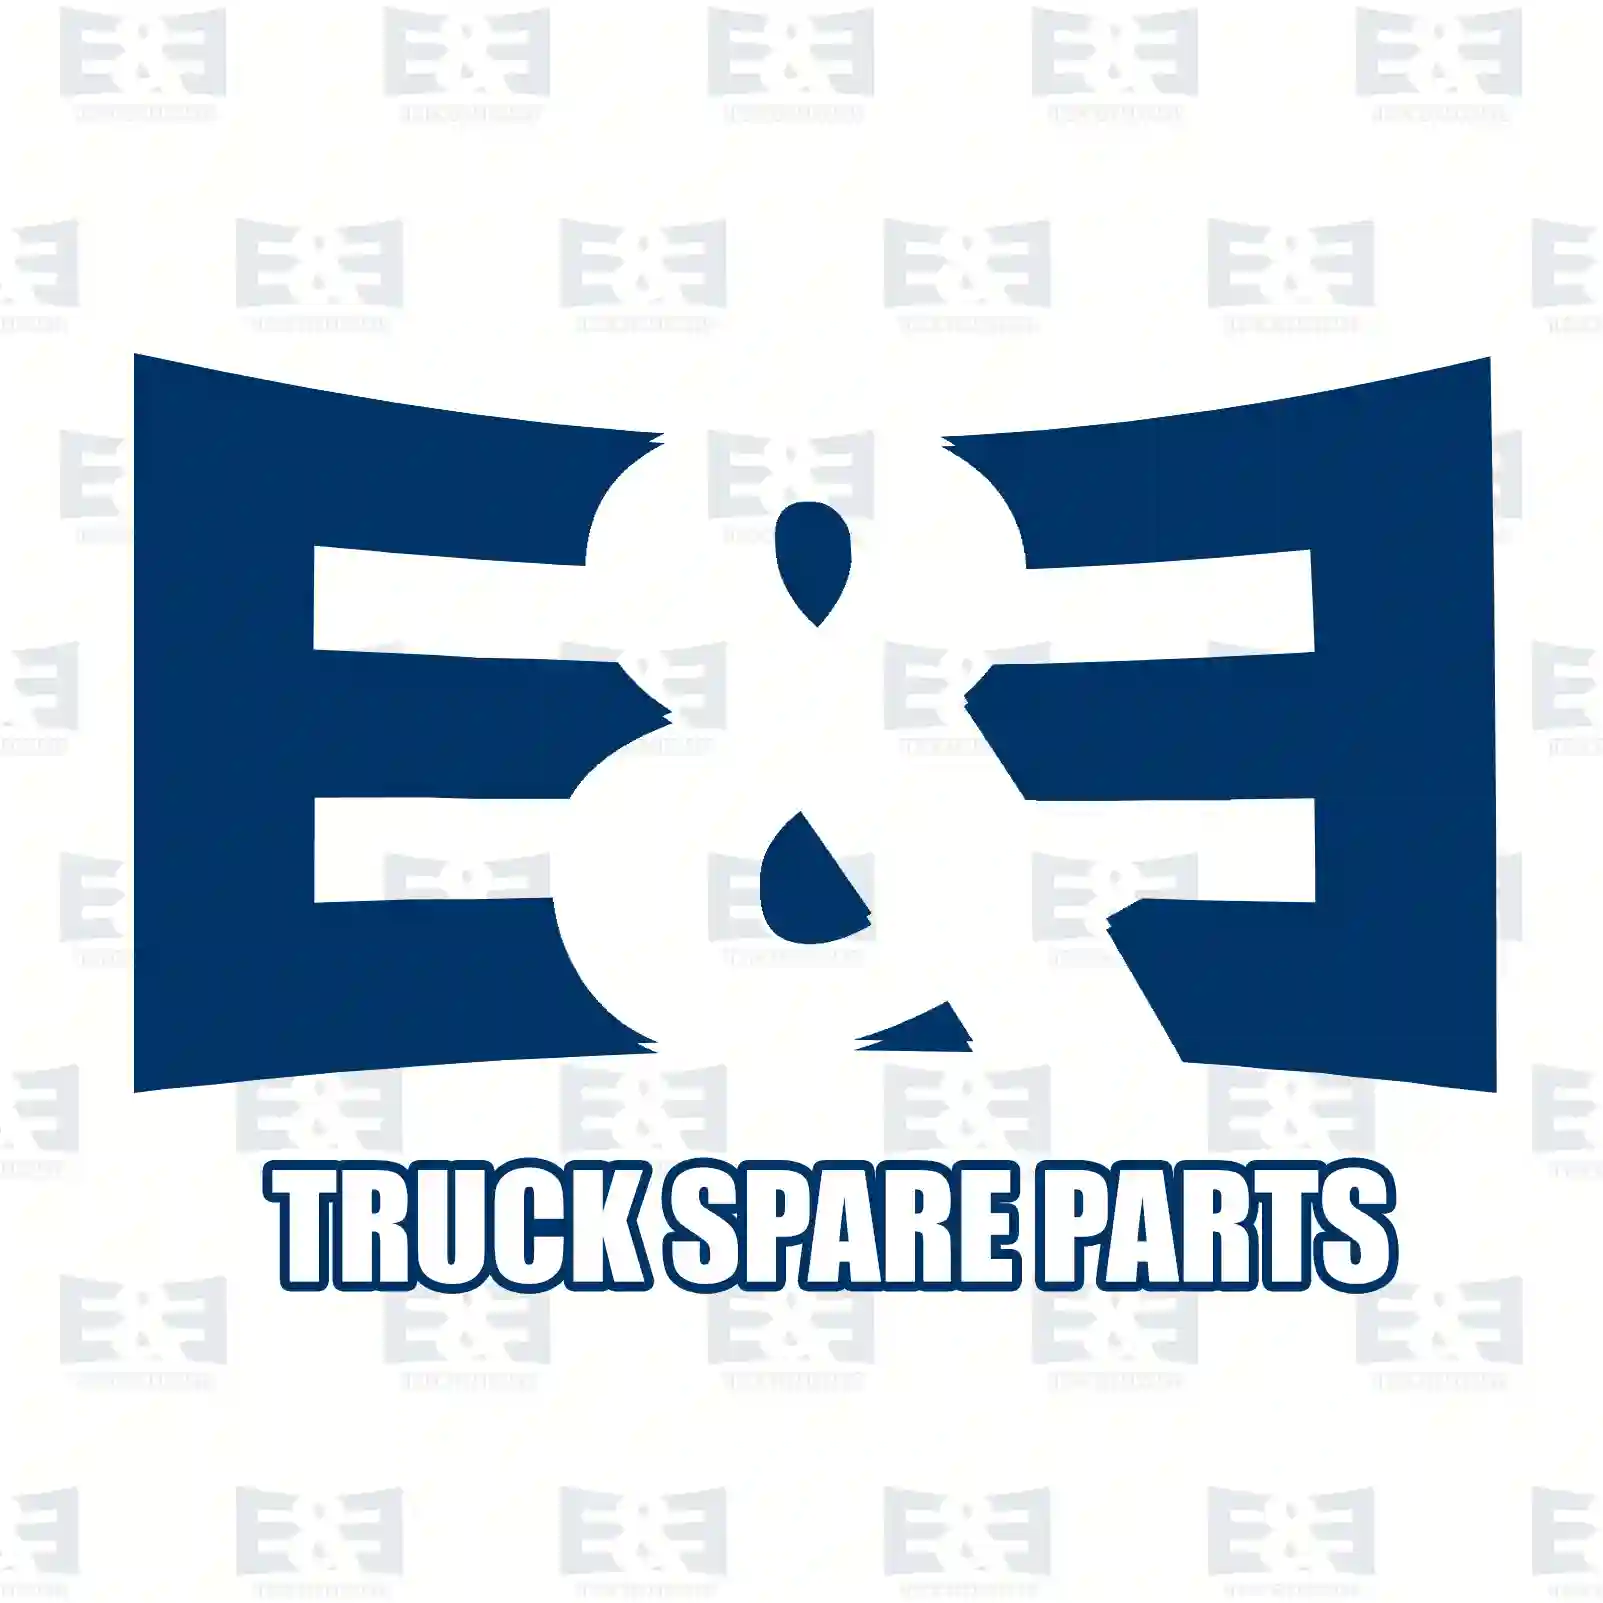  Disc brake pad kit, without springs, with wear indicators || E&E Truck Spare Parts | Truck Spare Parts, Auotomotive Spare Parts